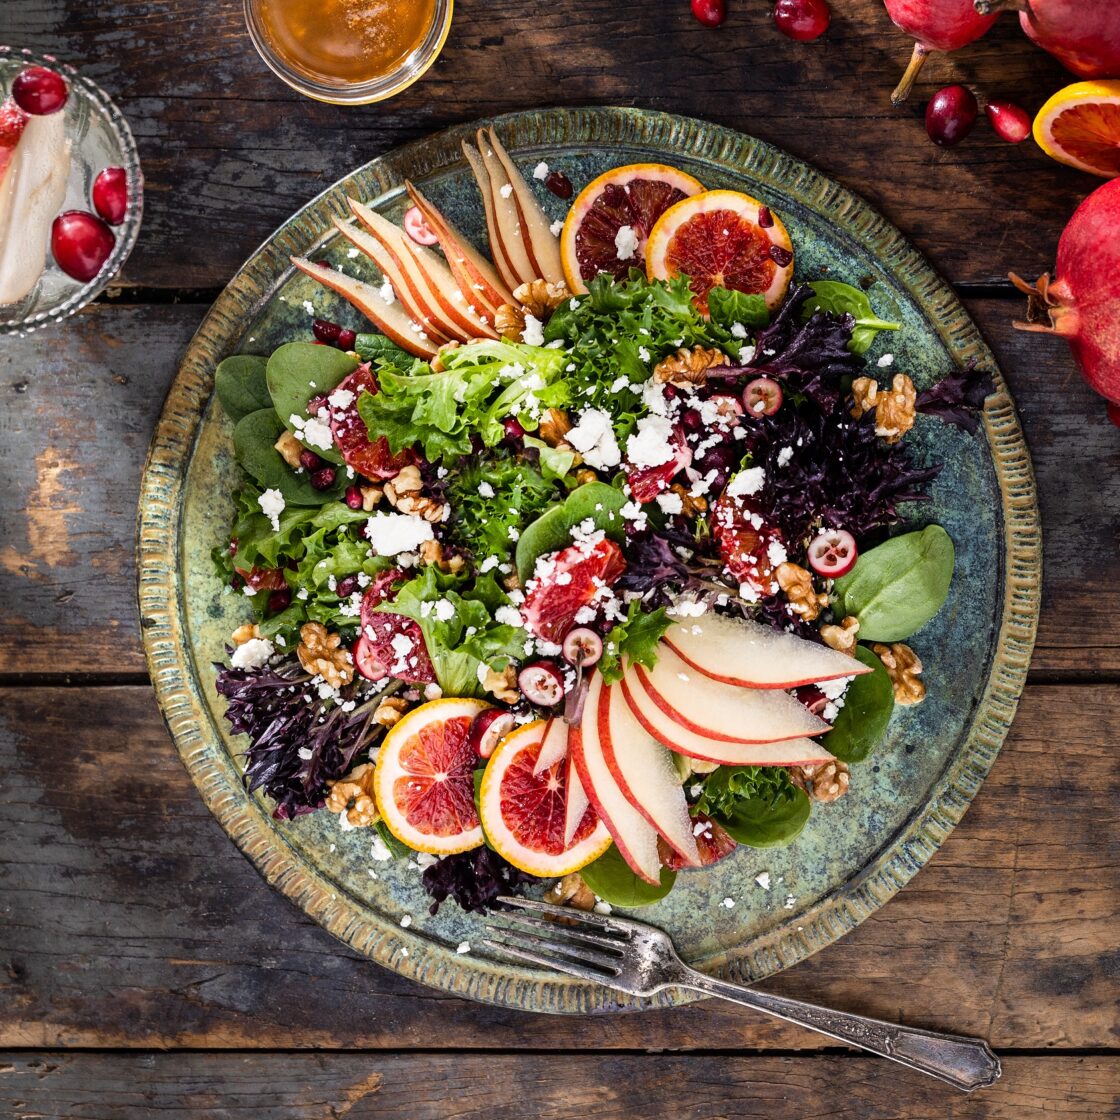 Overhead view of a large plated green salad with red pear slices, blood oranges, cranberries, pomegranate, feta cheese crumbles, and walnuts